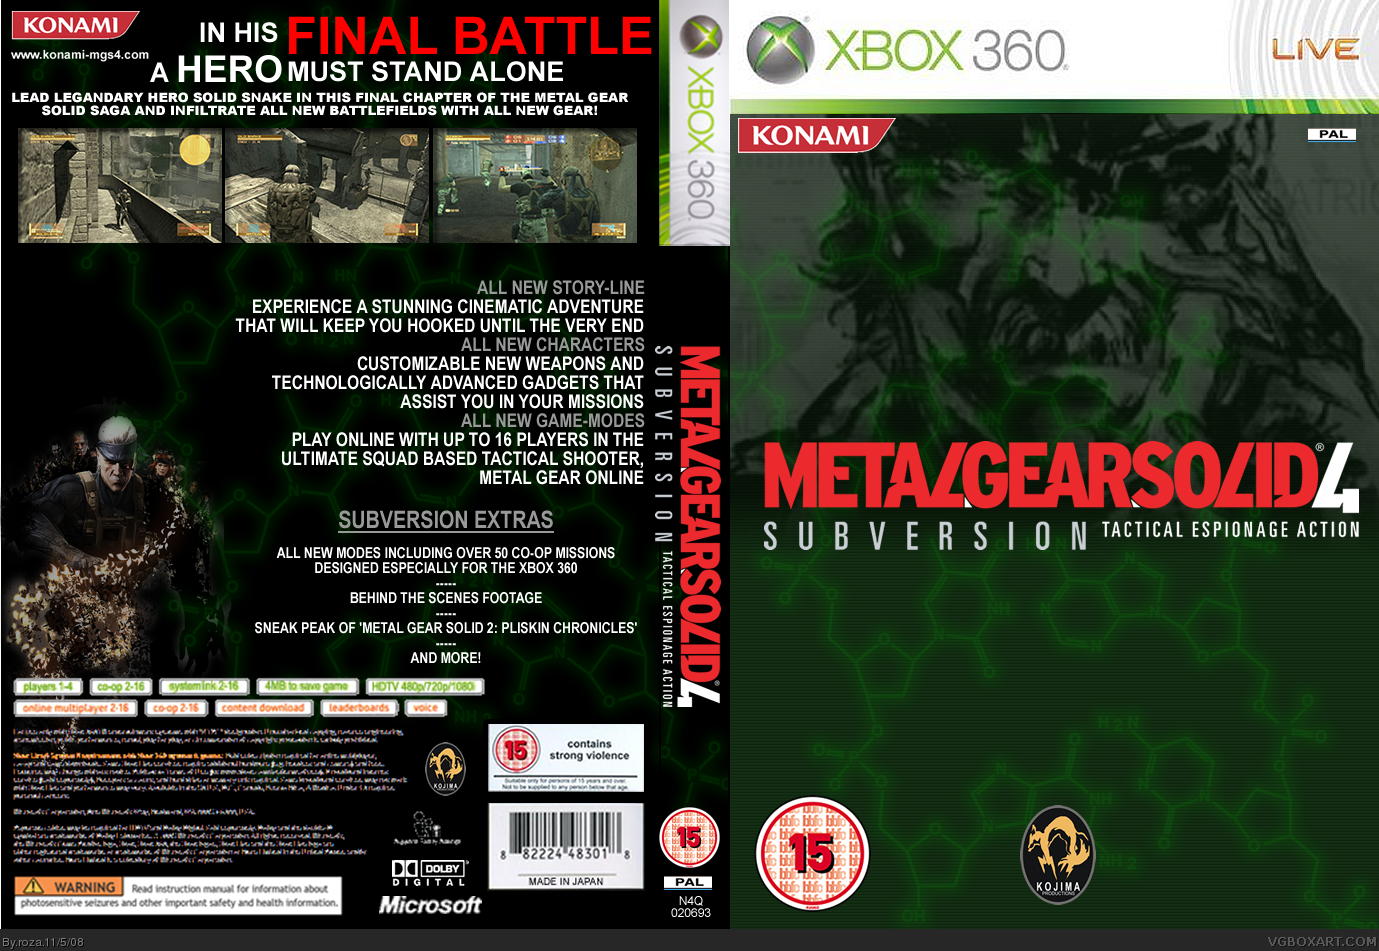 Metal Gear Solid 4: Subversion box cover